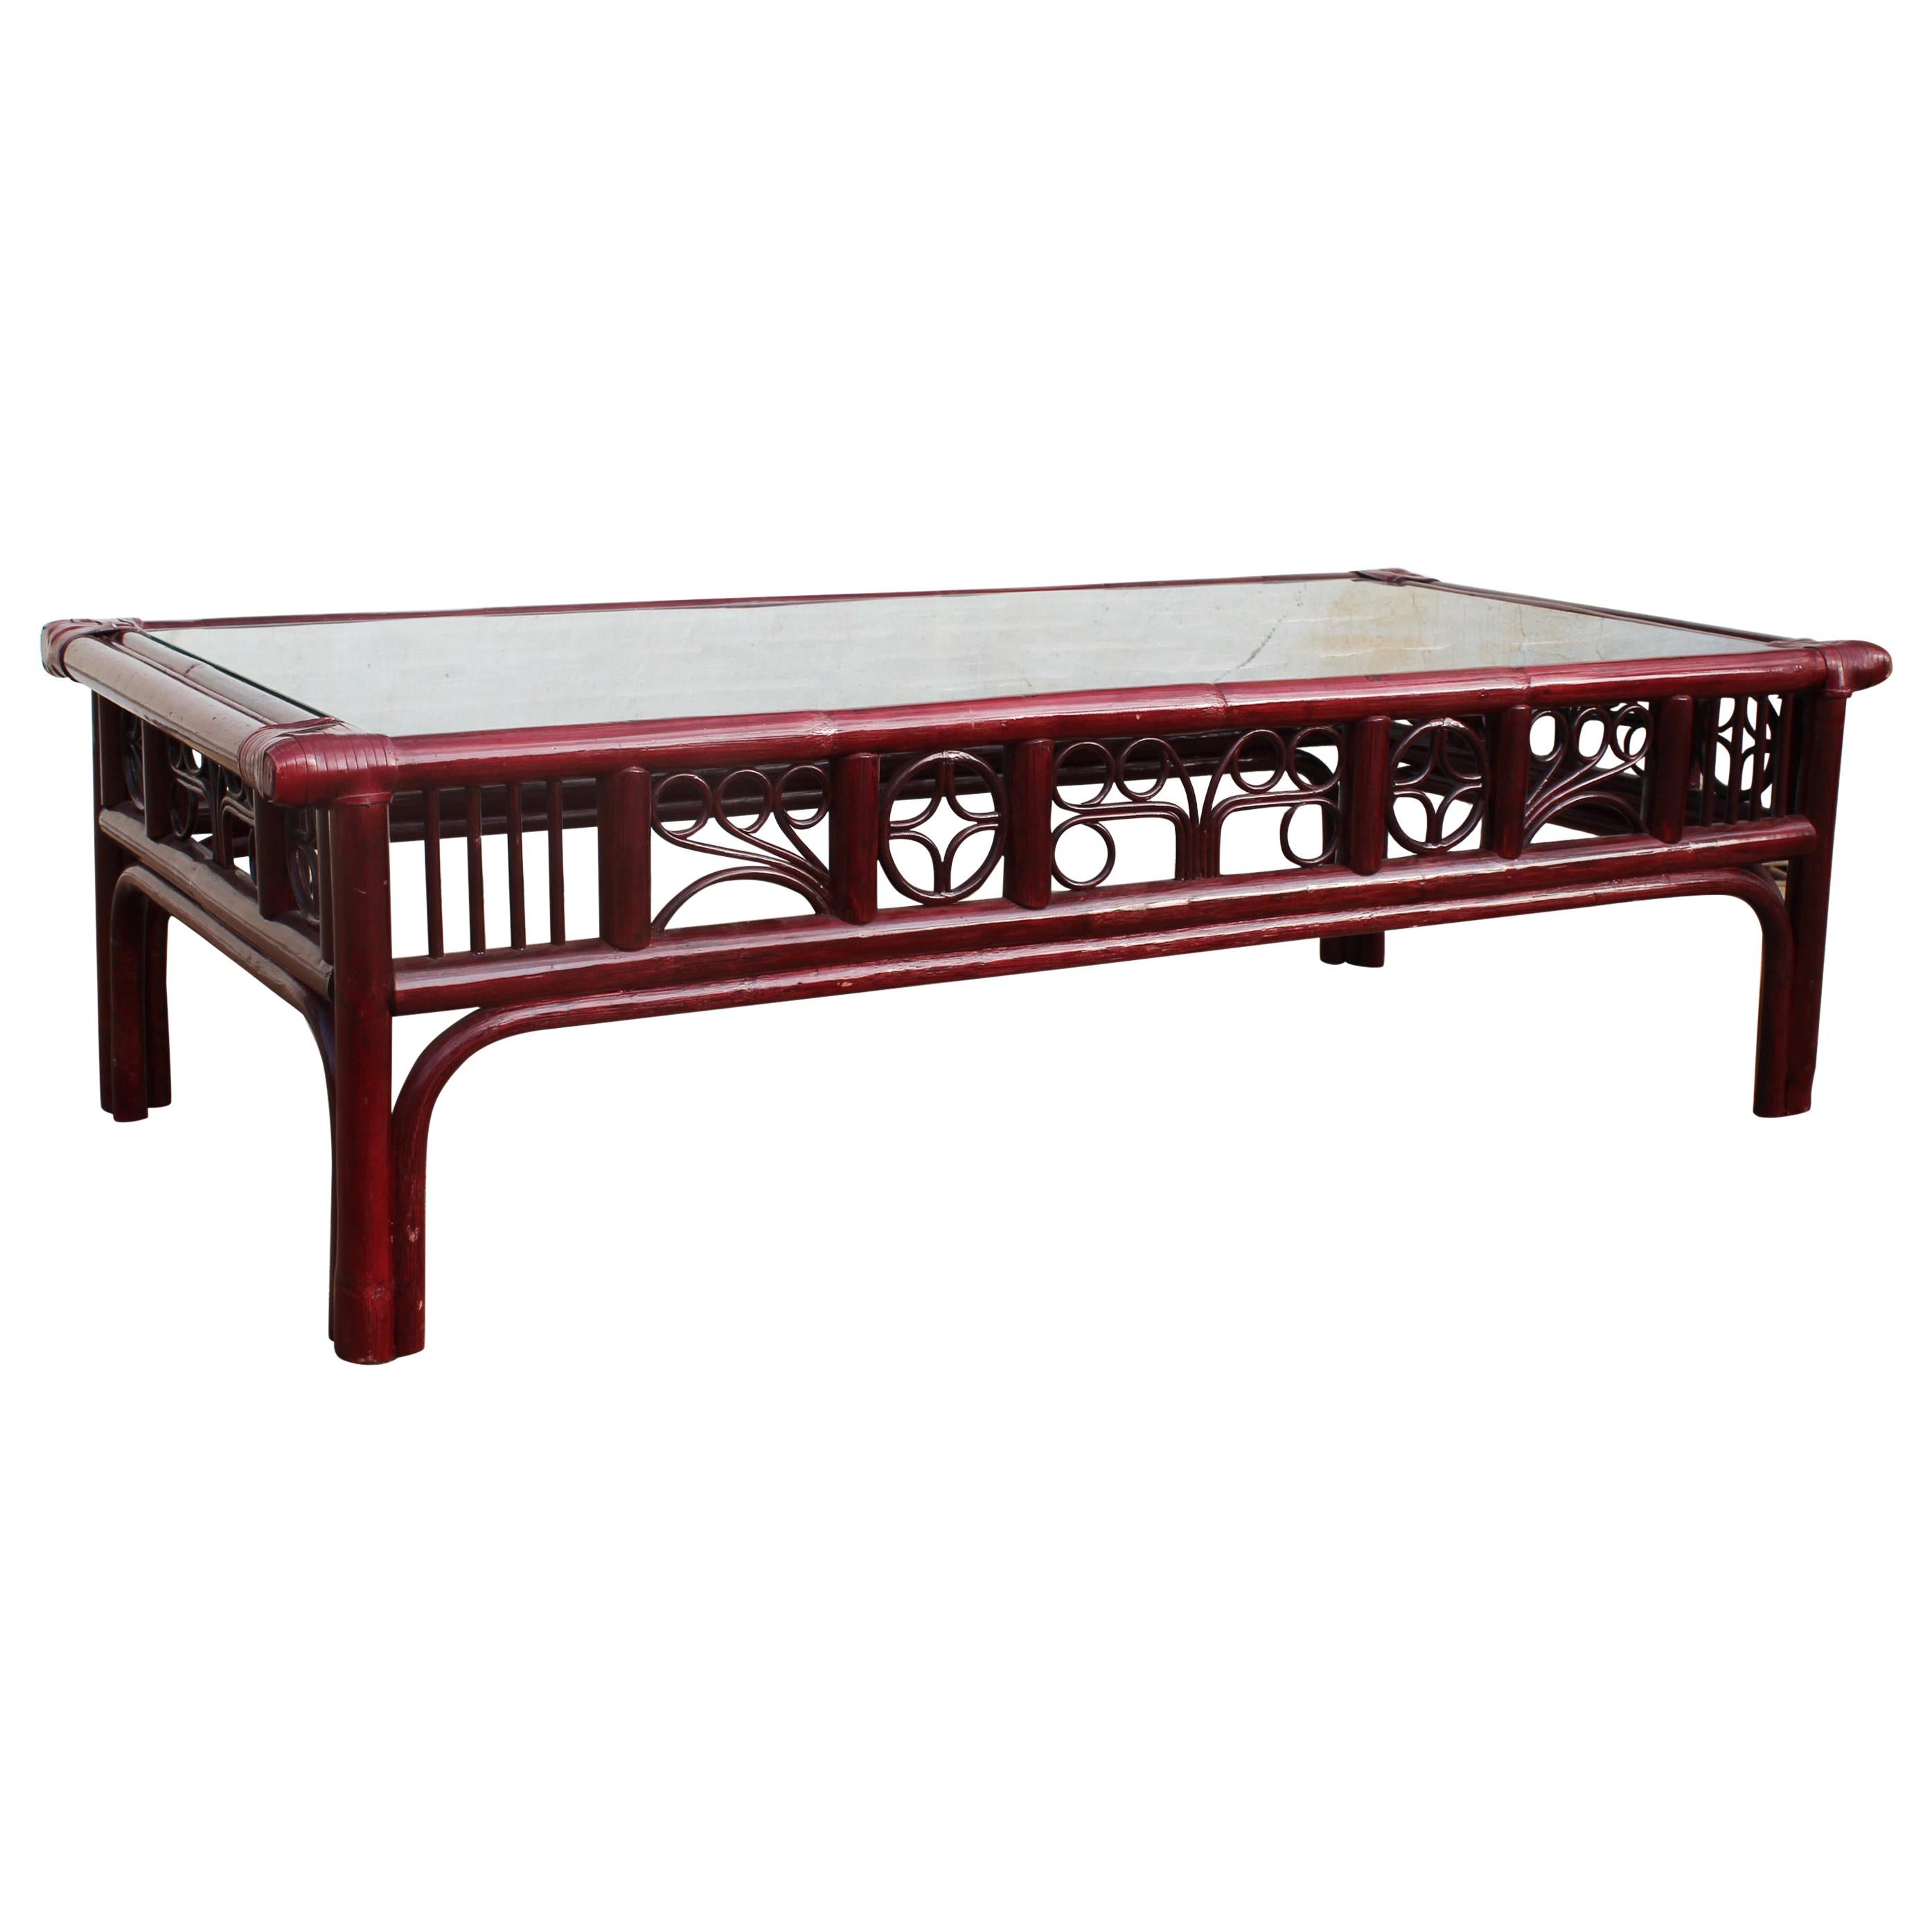 1970s Spanish Oriental Style Red Wooden Coffee Table with Leather Binds For Sale